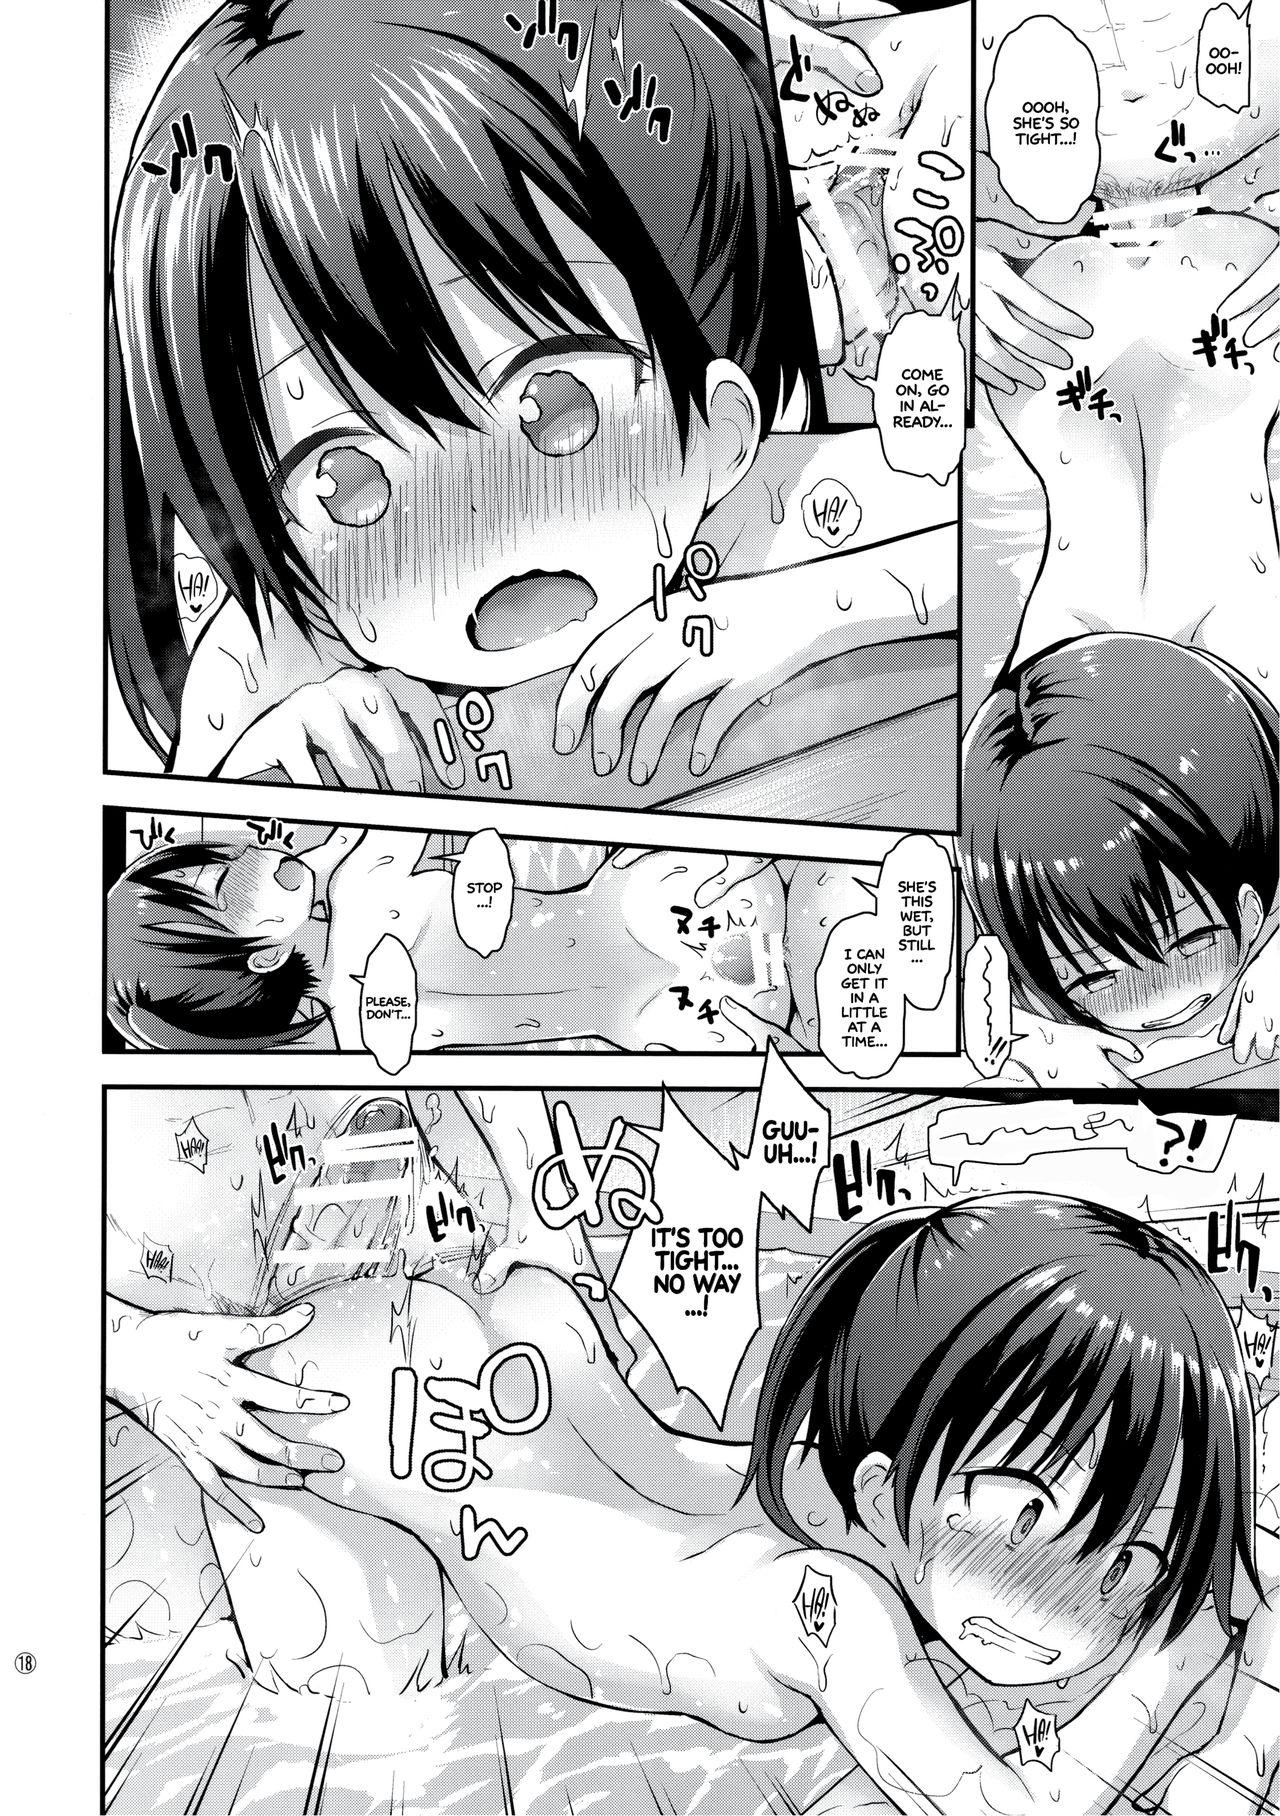 Onnanoko datte Otokoyu ni Hairitai | They may just be little girls, but they still want to enter the men's bath! 16